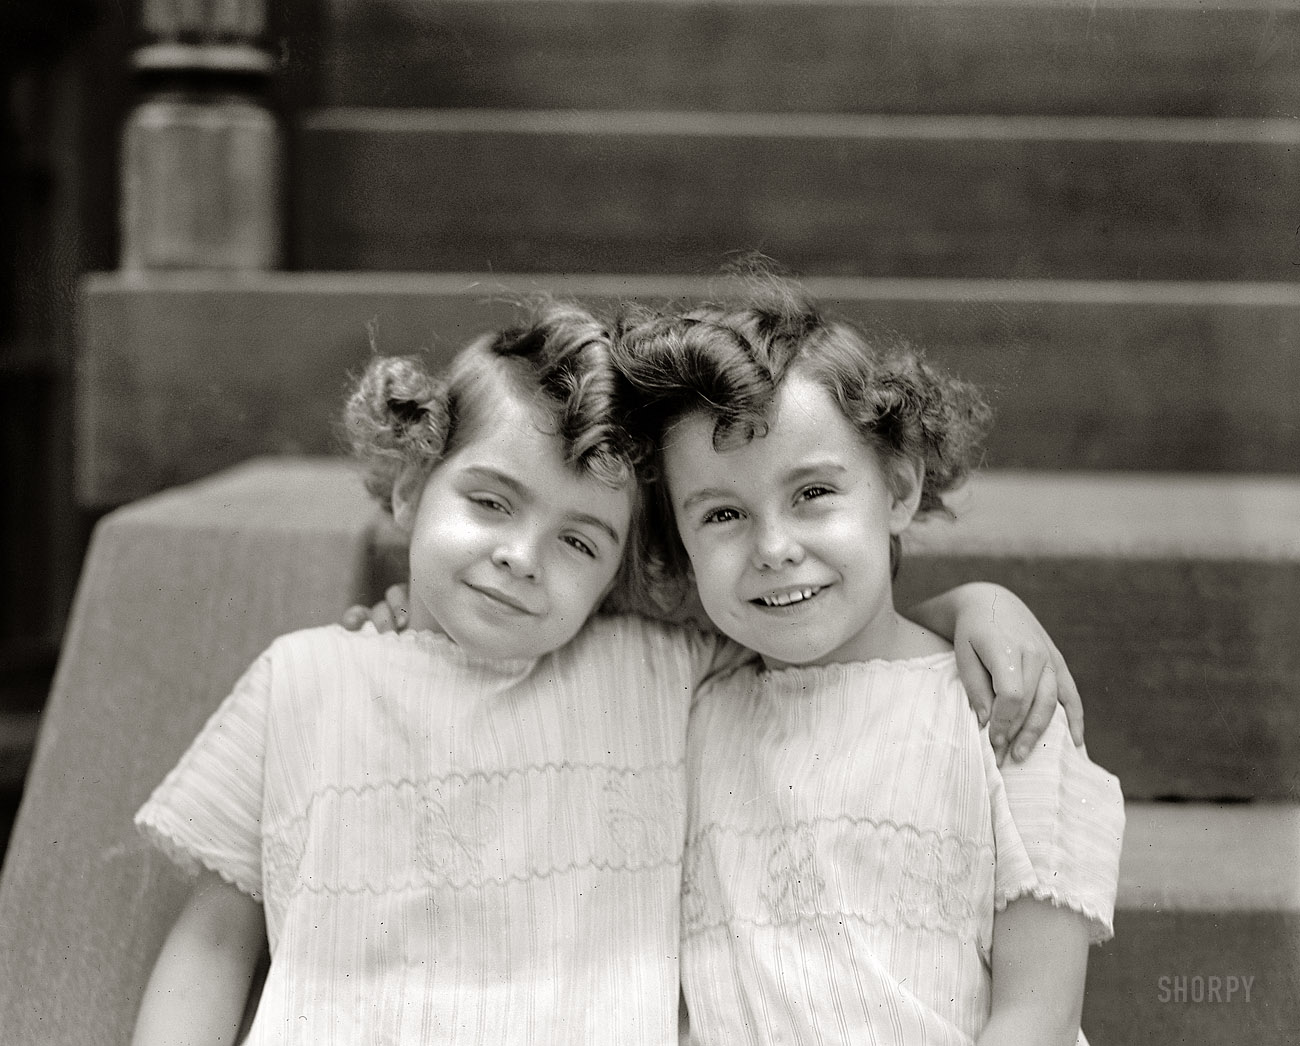 May 20, 1922. Washington, D.C. "Veronica & Miriam de Gracie," daughters of Mr. and Mrs. S. Lonsade de Gracie. National Photo Co. glass negative. View full size.